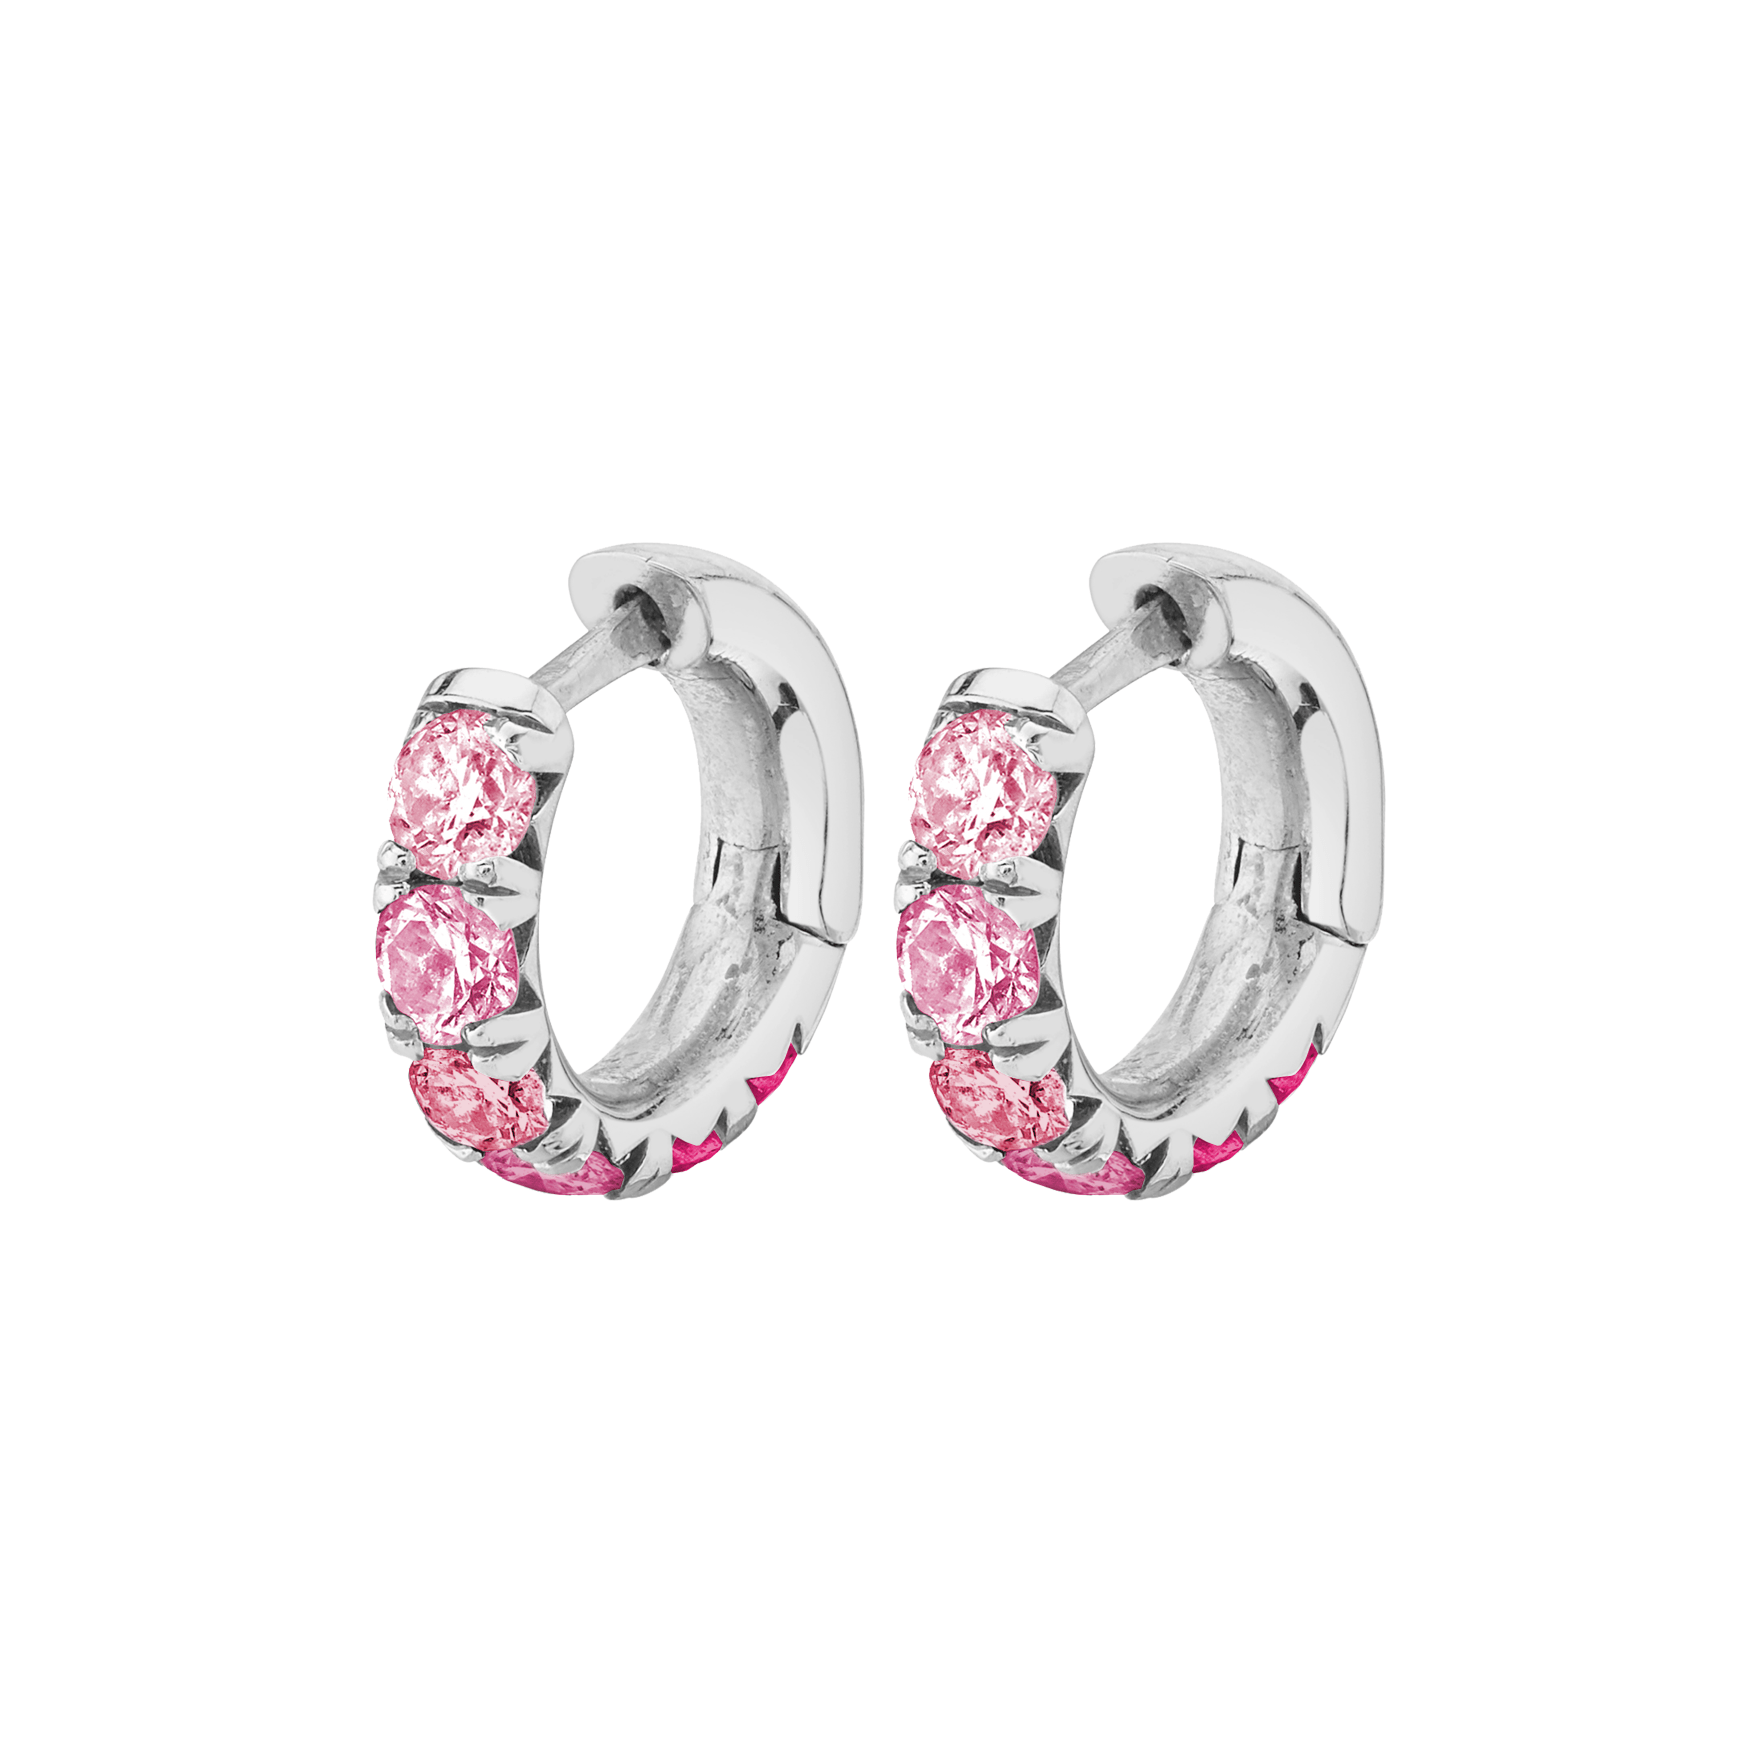 NEW! Baby Ombr  Pink Sapphire French Pav  Hoops